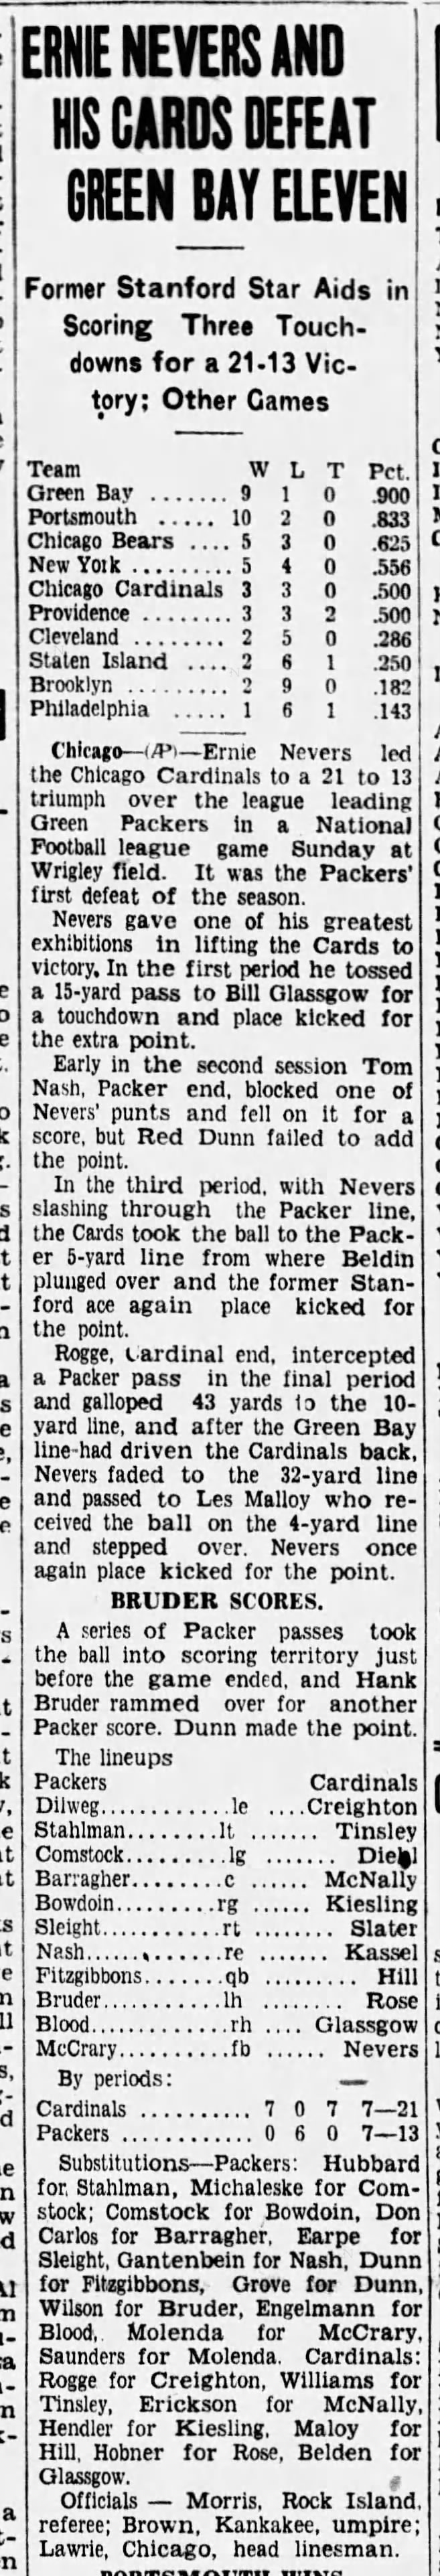 Ernie Nevers and His Cards Defeat Green Bay Eleven